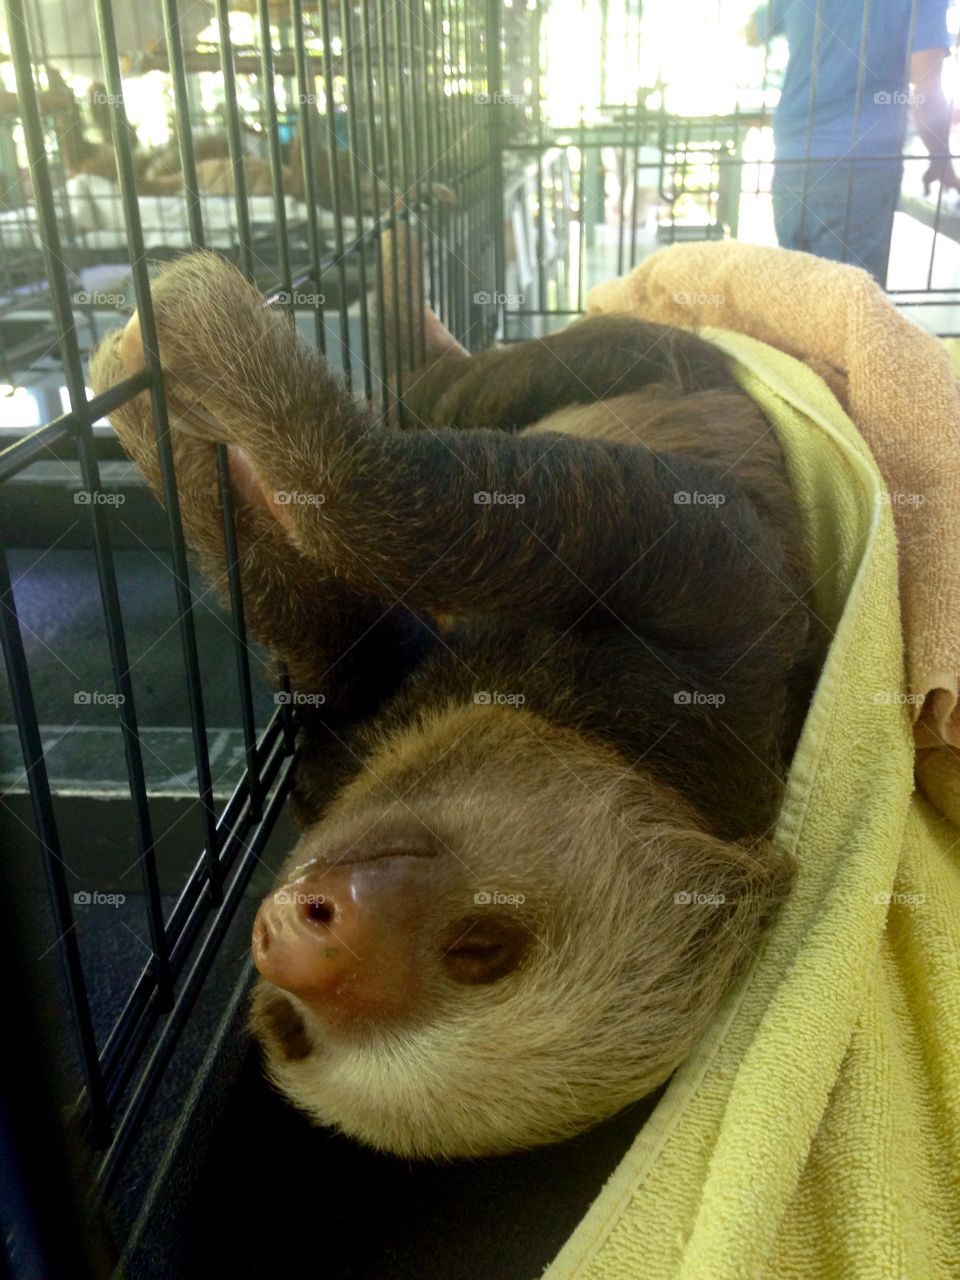 Sloth at the sloth sanctuary in Costa Rica 